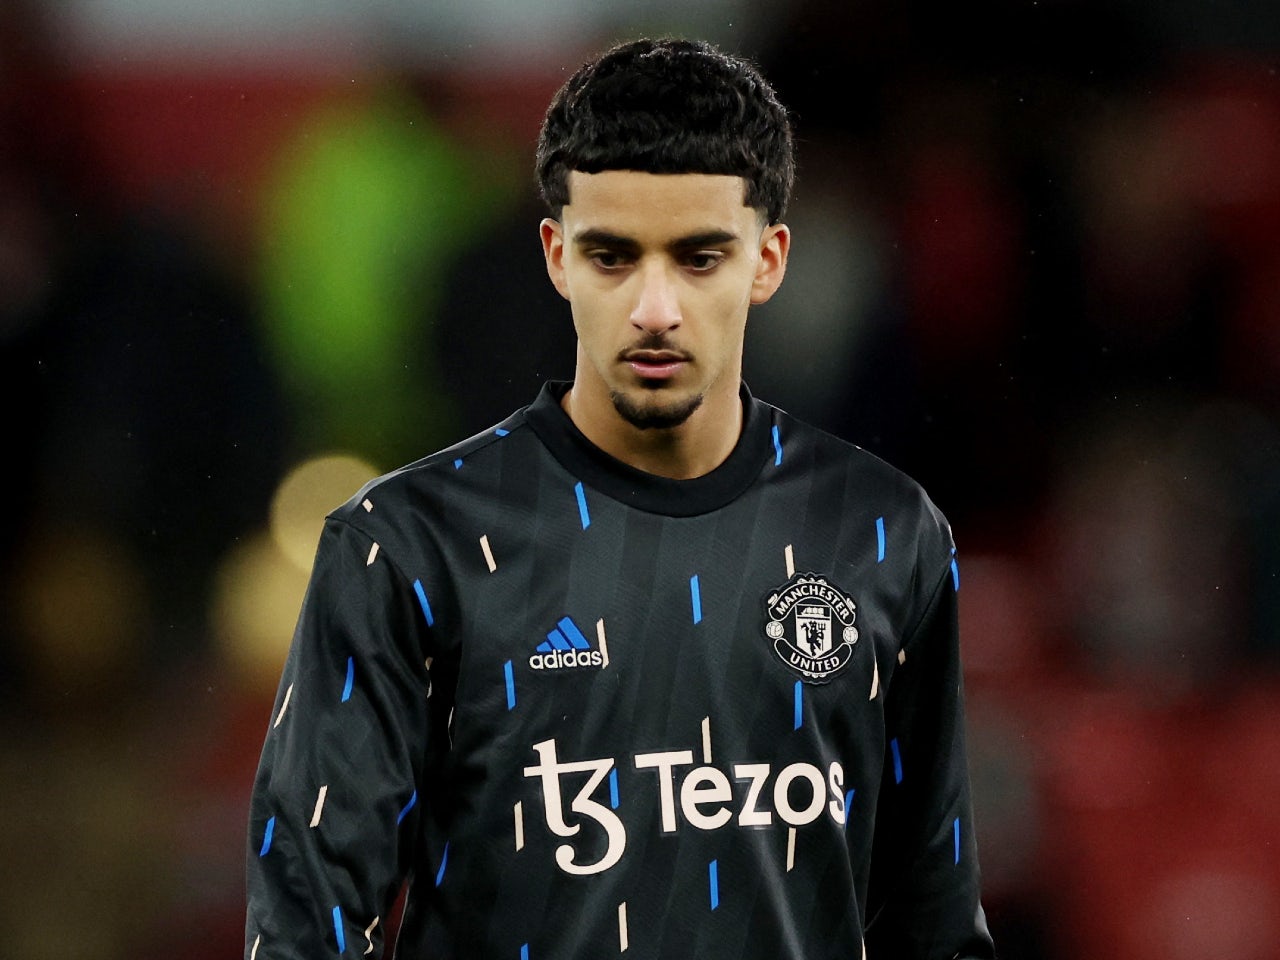 Zidane Iqbal 'set for permanent Manchester United exit'